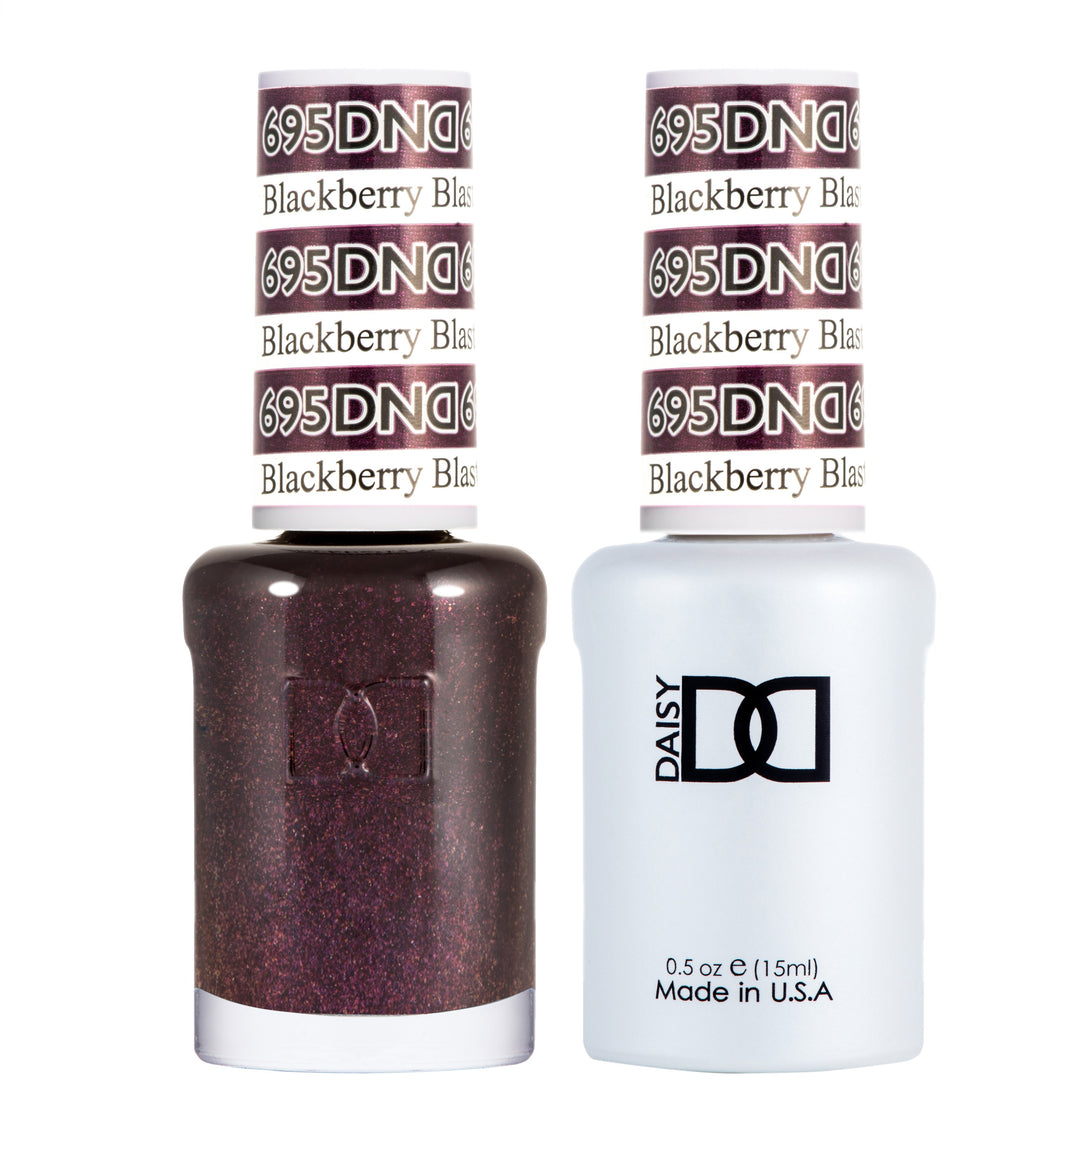 DND DUO Nail Lacquer and UV|LED Gel Polish Blackberry Blast 695 (2 x 15ml)